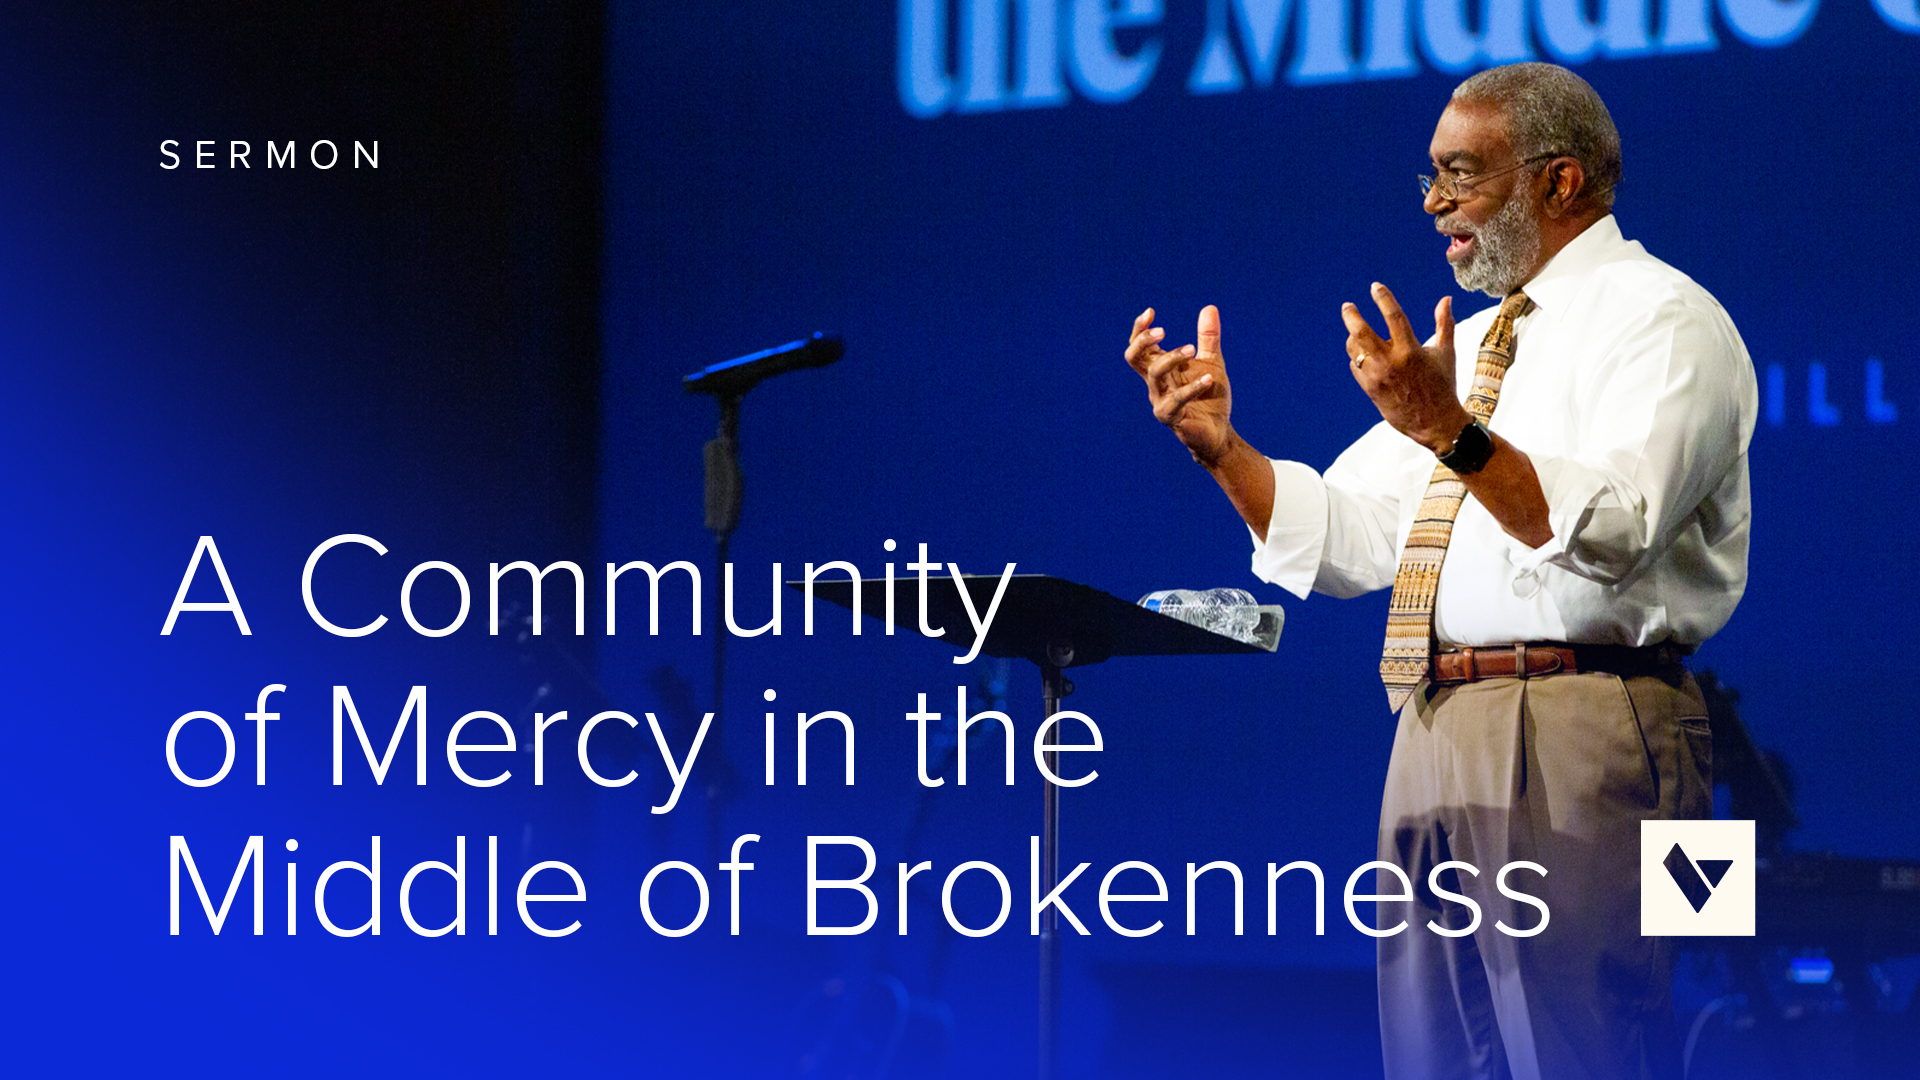 A Community of Mercy in the Middle of Brokenness